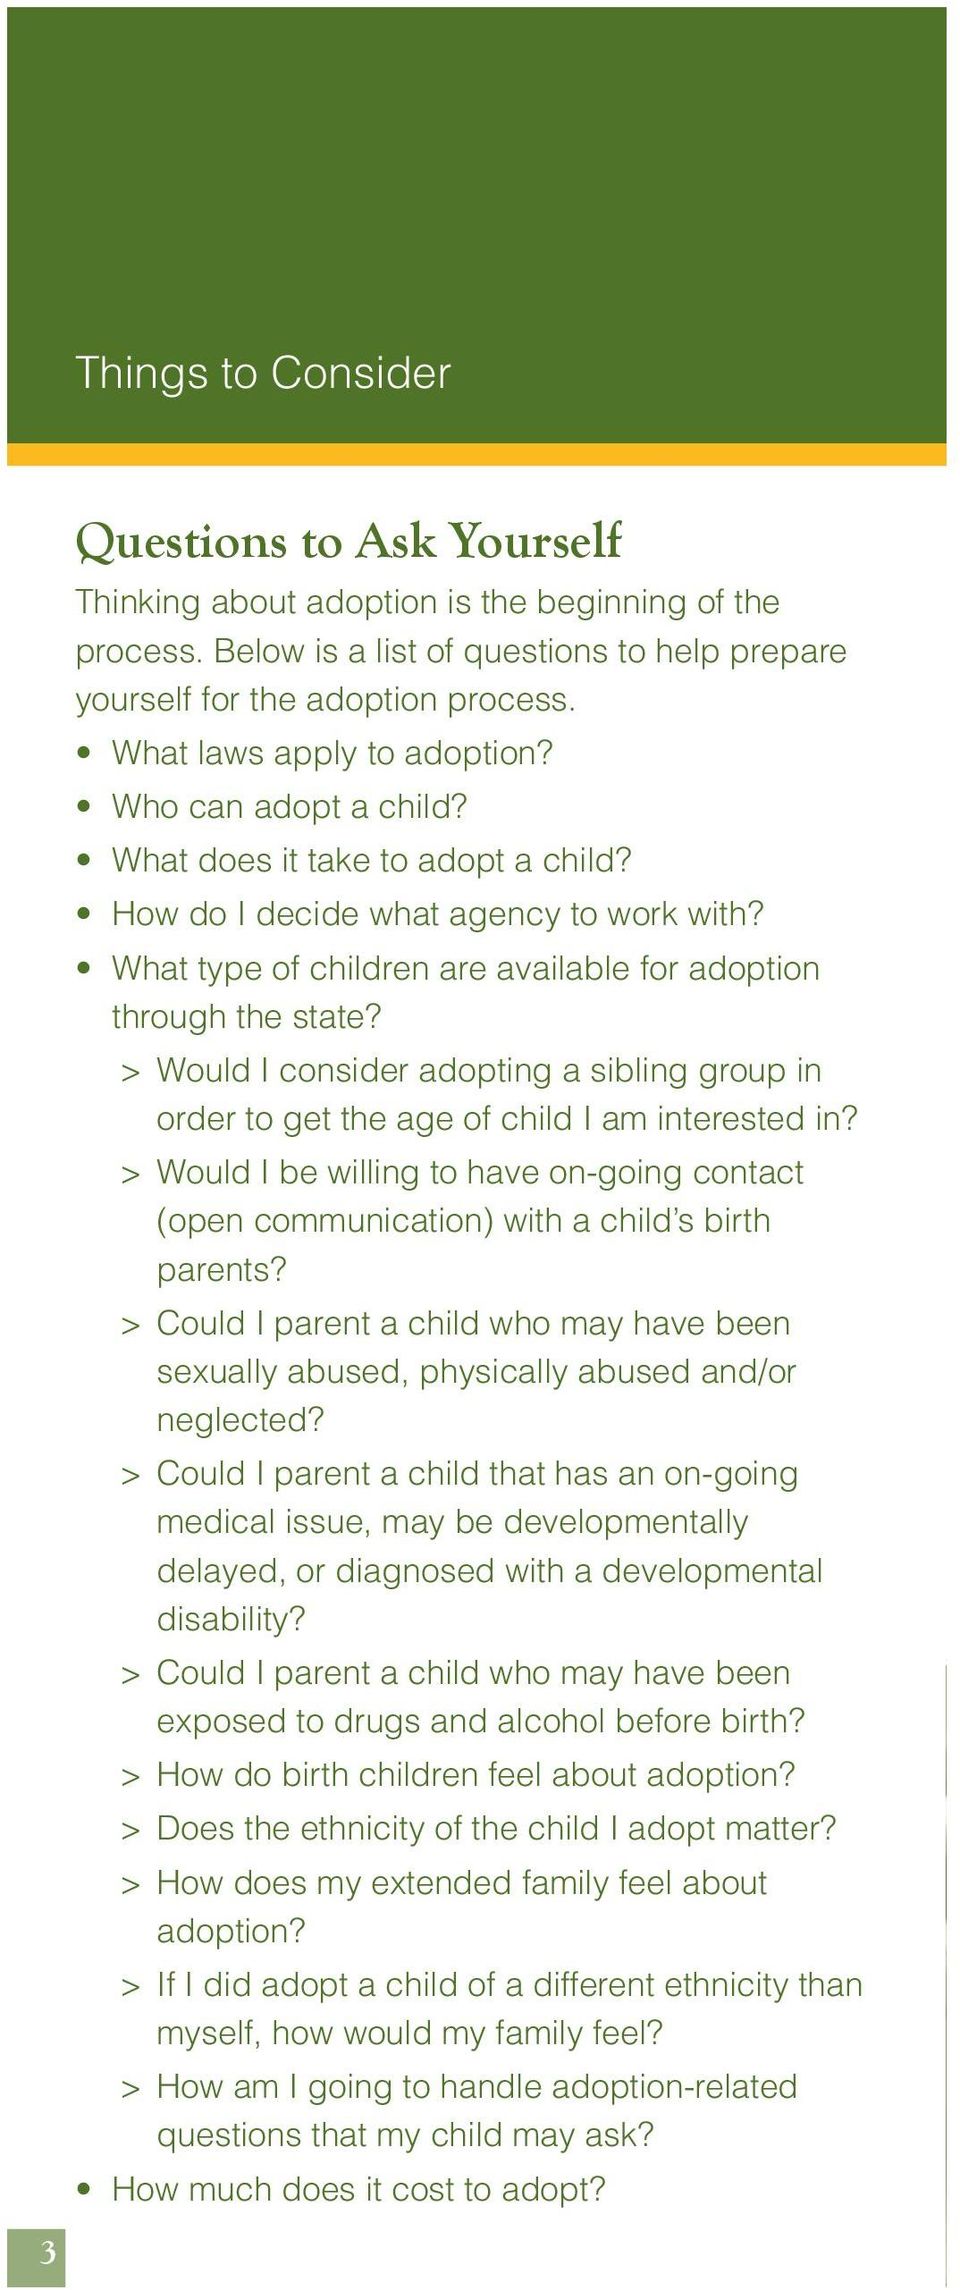 > Would I consider adopting a sibling group in order to get the age of child I am interested in? > Would I be willing to have on-going contact (open communication) with a child s birth parents?